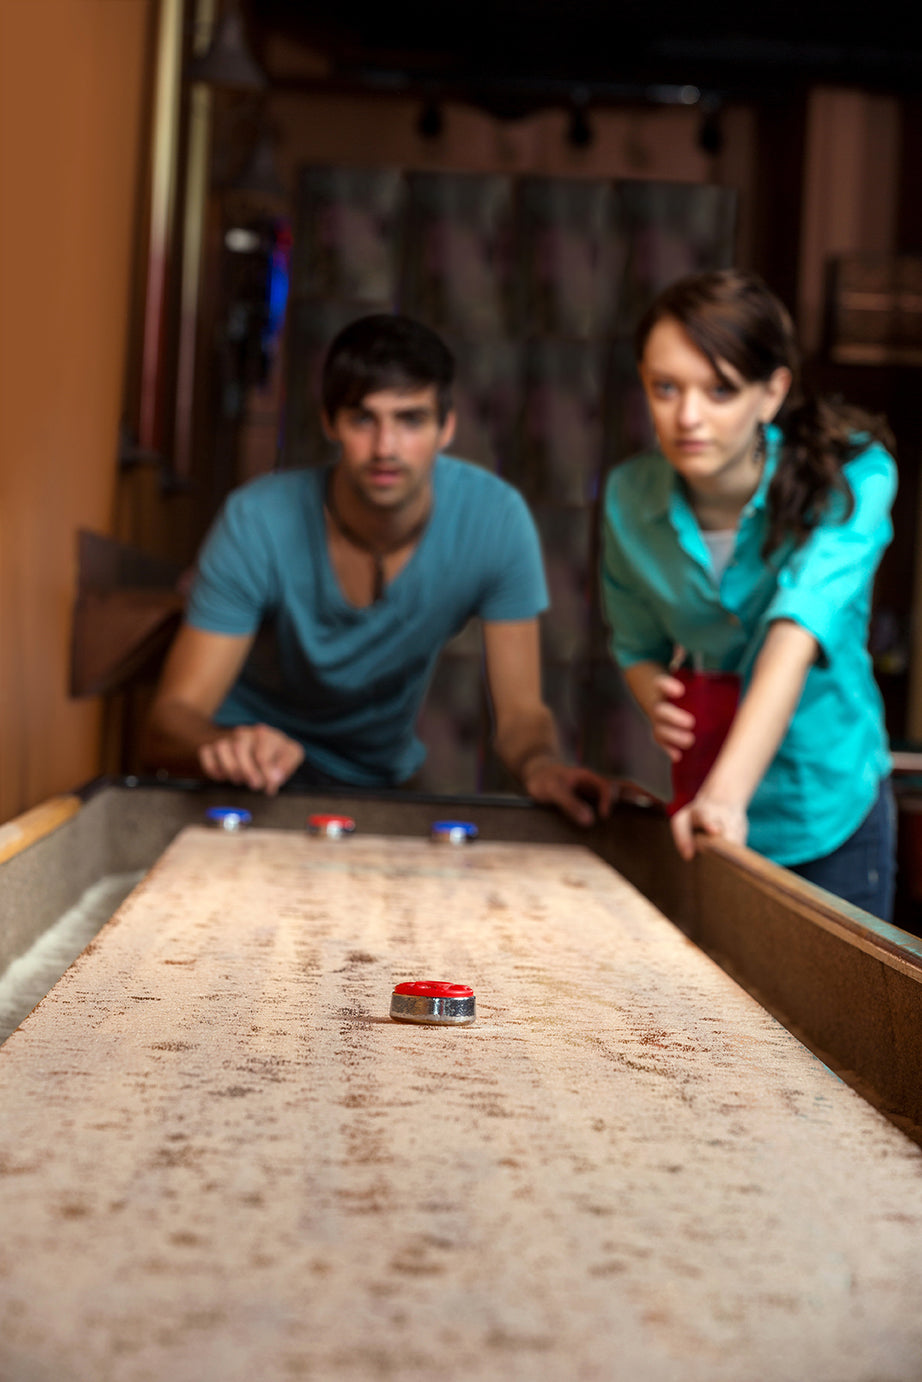 Top 5 Home Shuffleboard Table Games to get the party started! (Part 1)